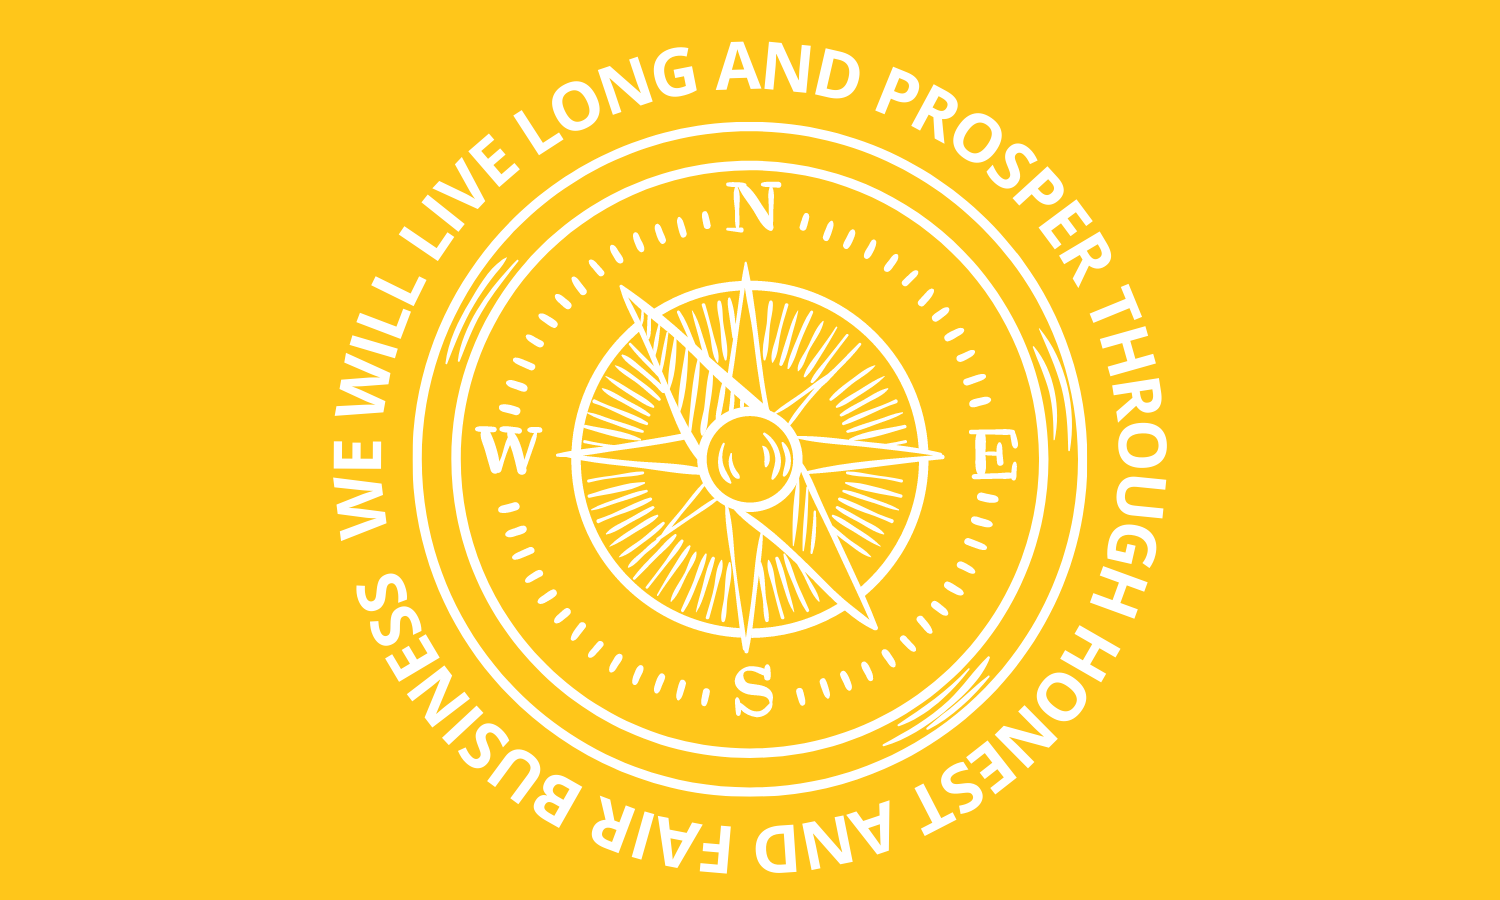 gold background with white text formatted in a circular pattern around a directional compass. the text reads:  We will live long and prosper through honest and fair business